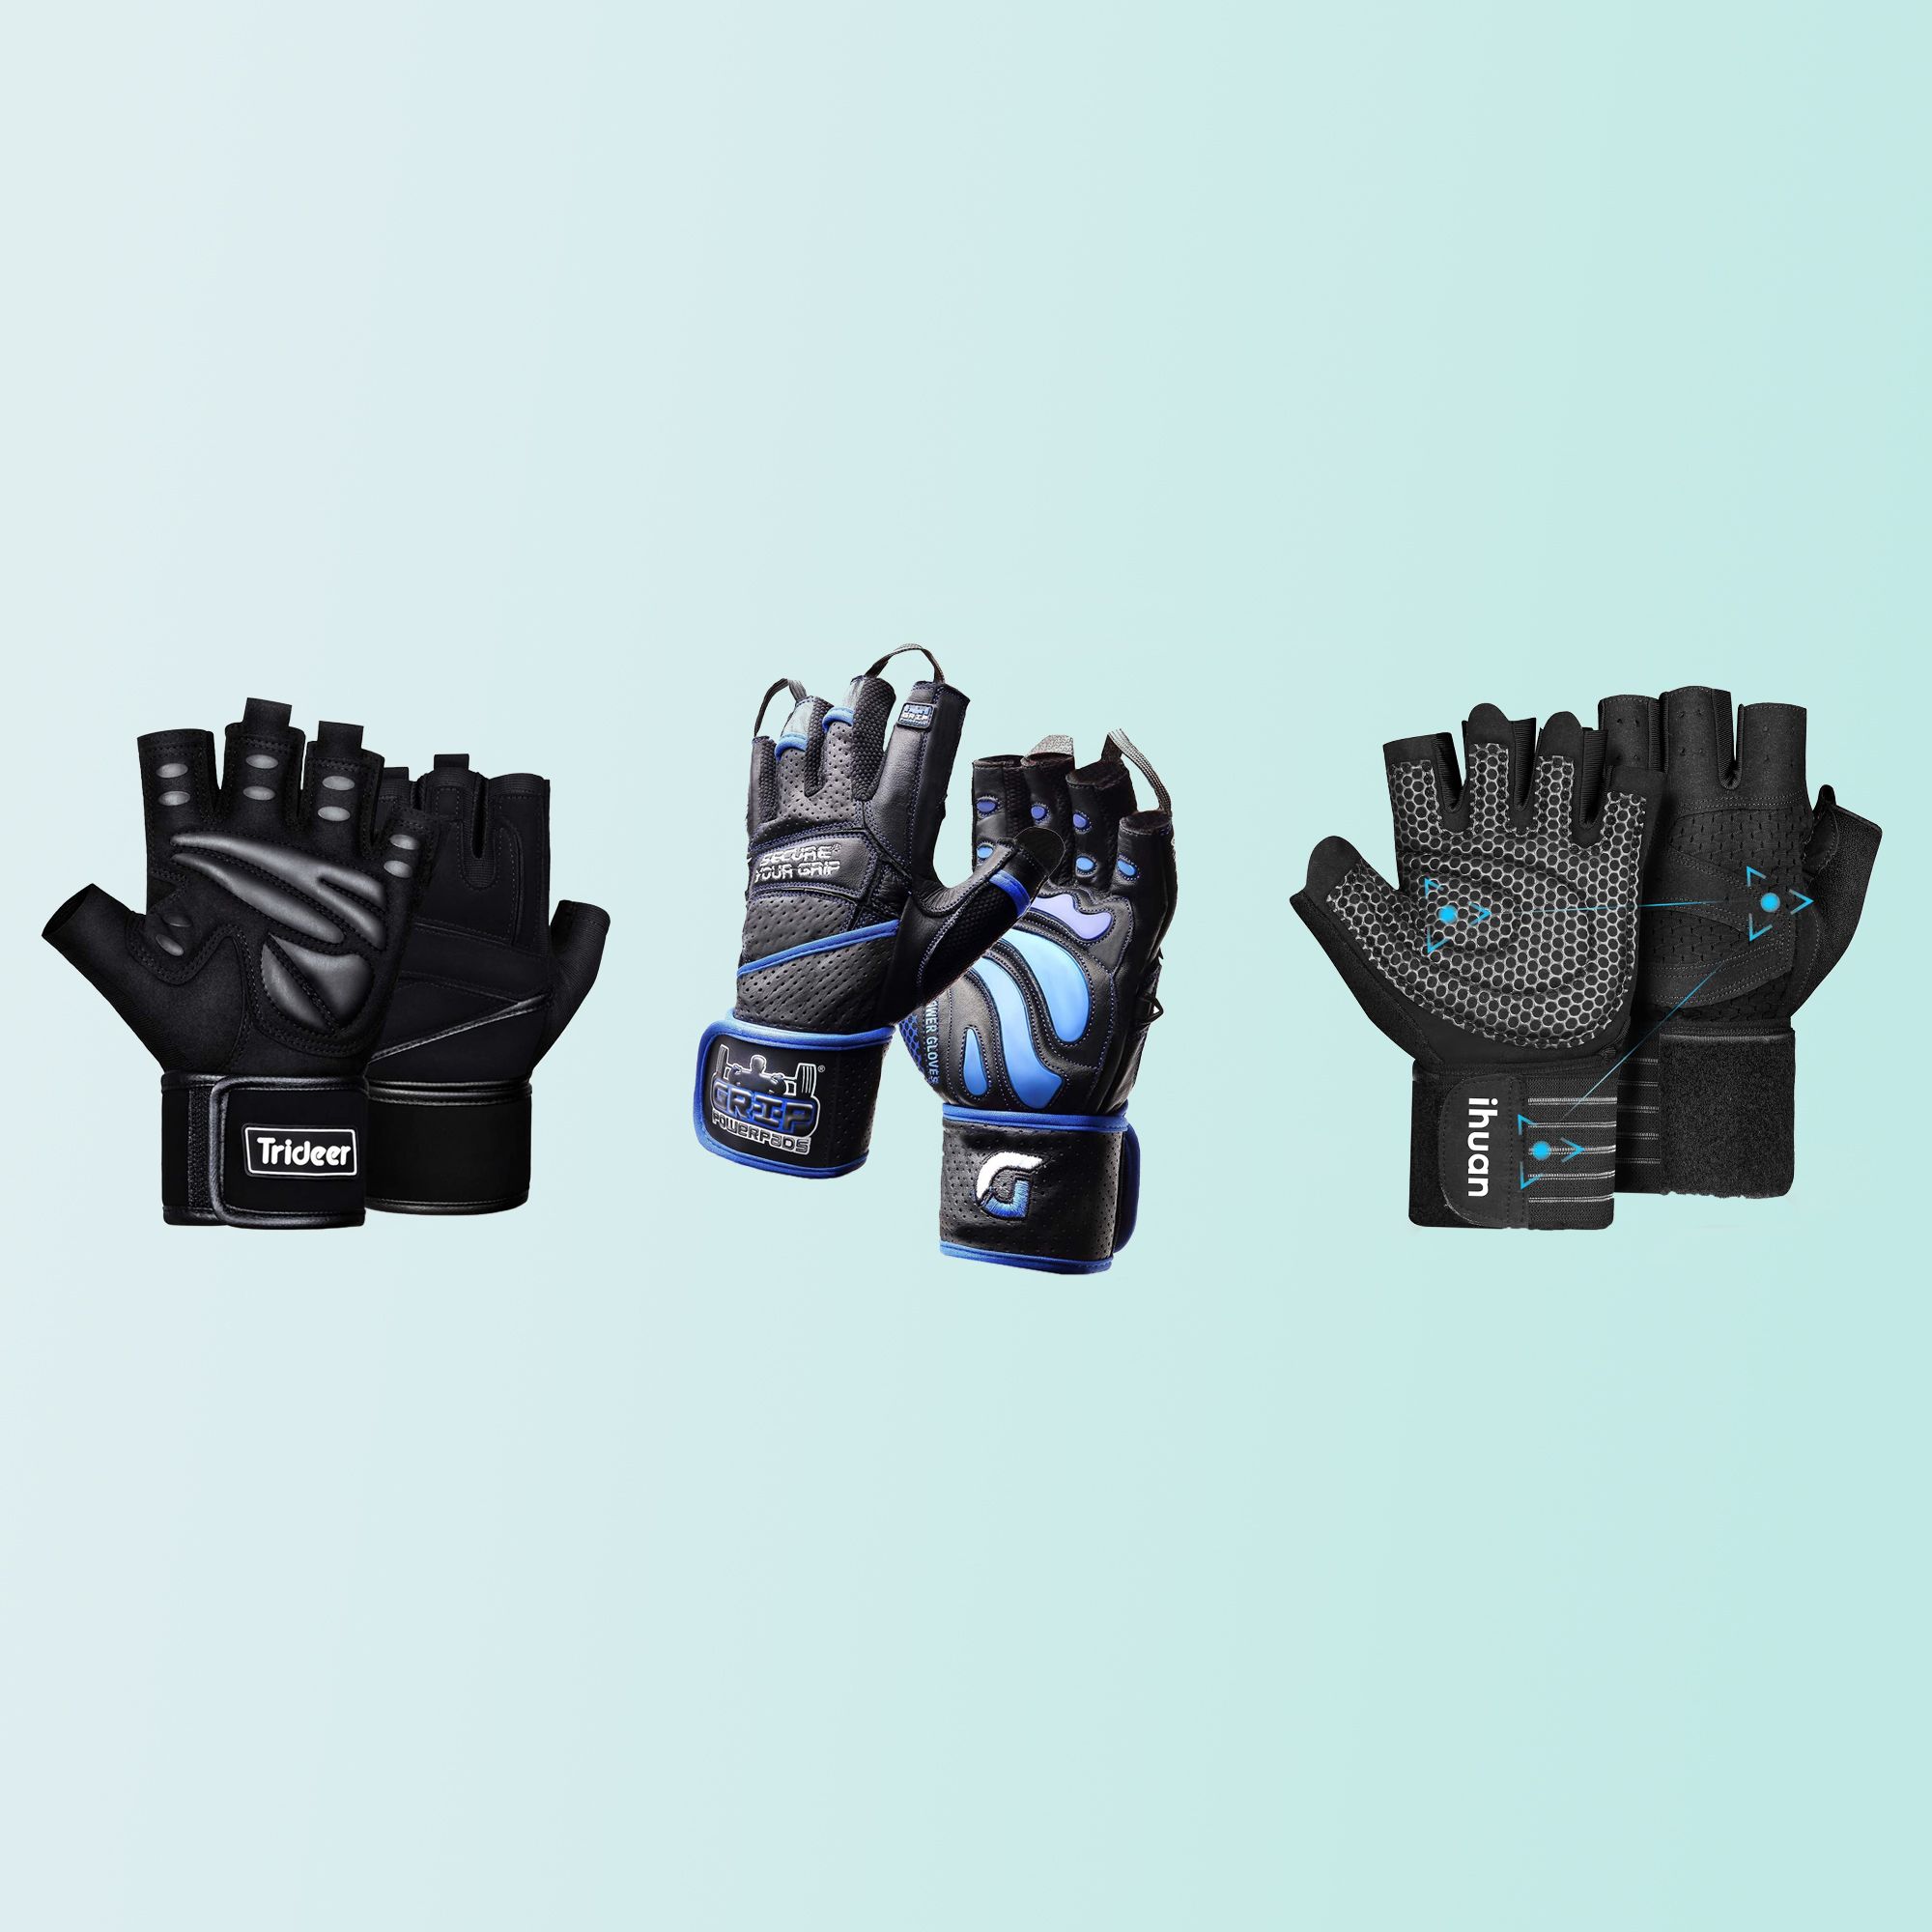 7 reasons to buy/not to buy ihuan Breathable Fingerless Workout Gloves